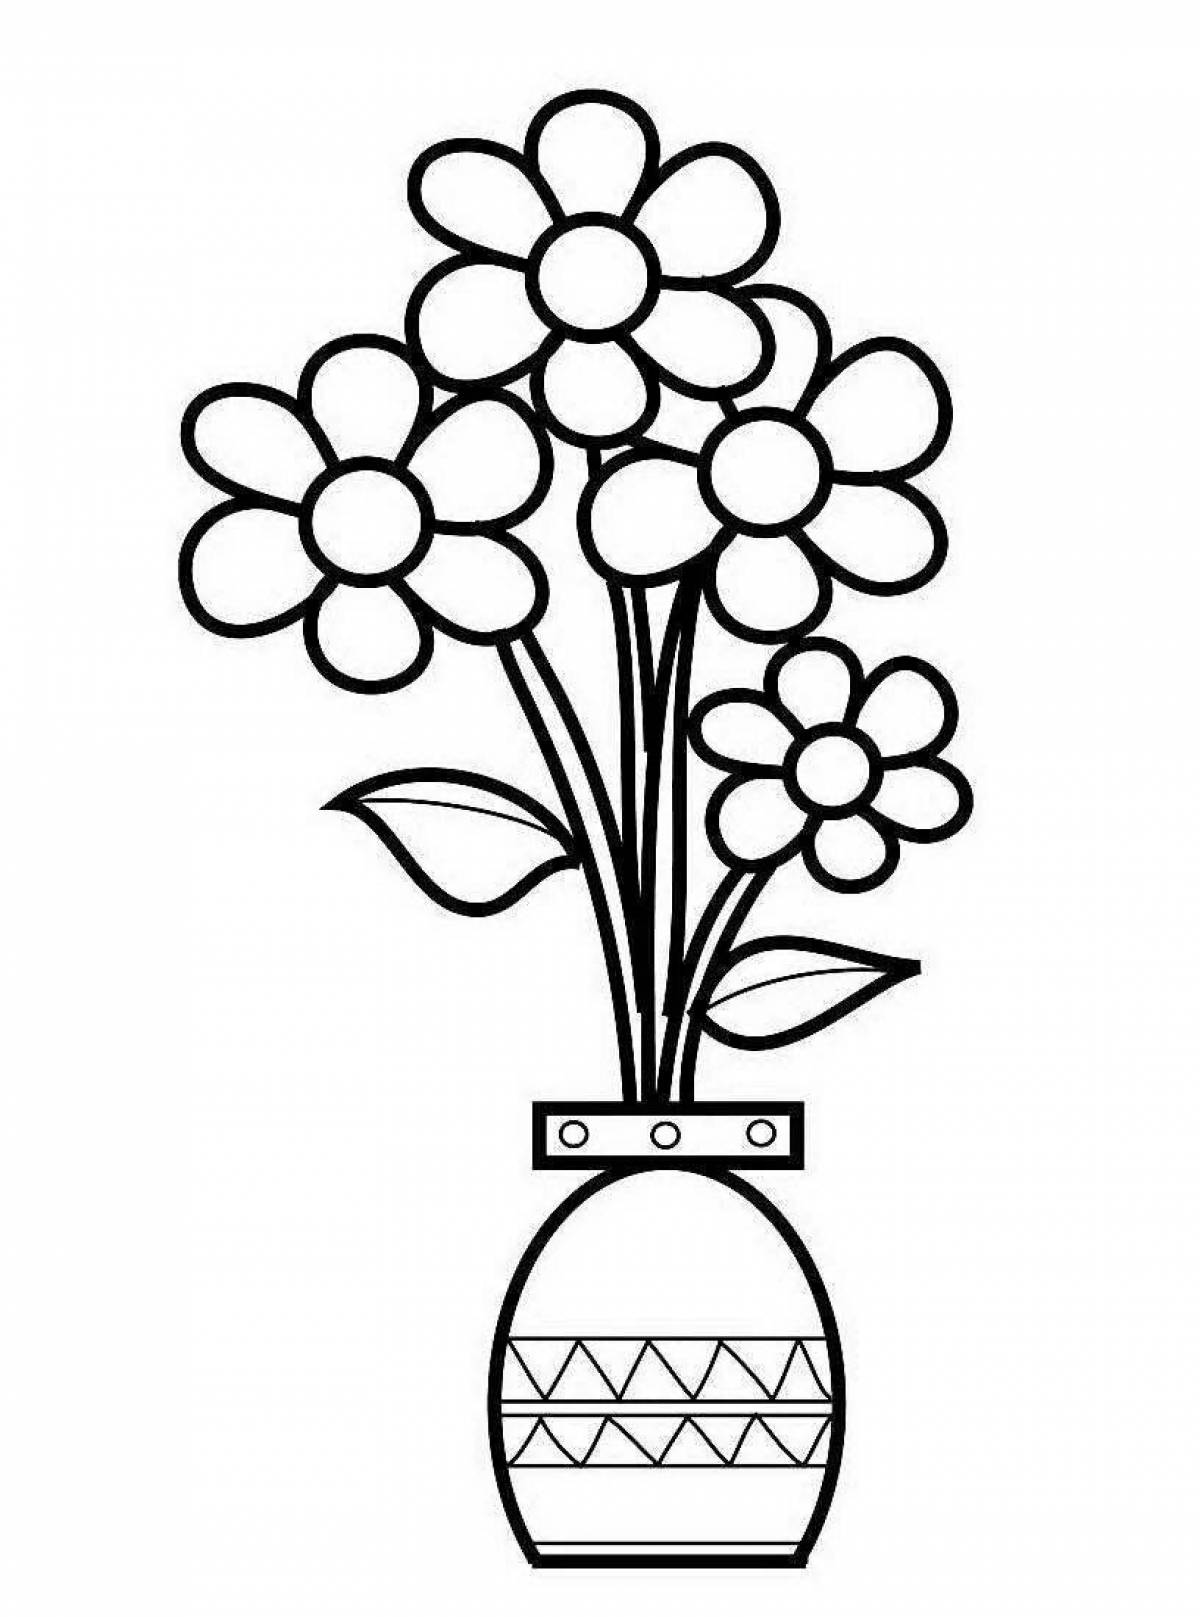 Coloring book shining bouquet of flowers in a vase